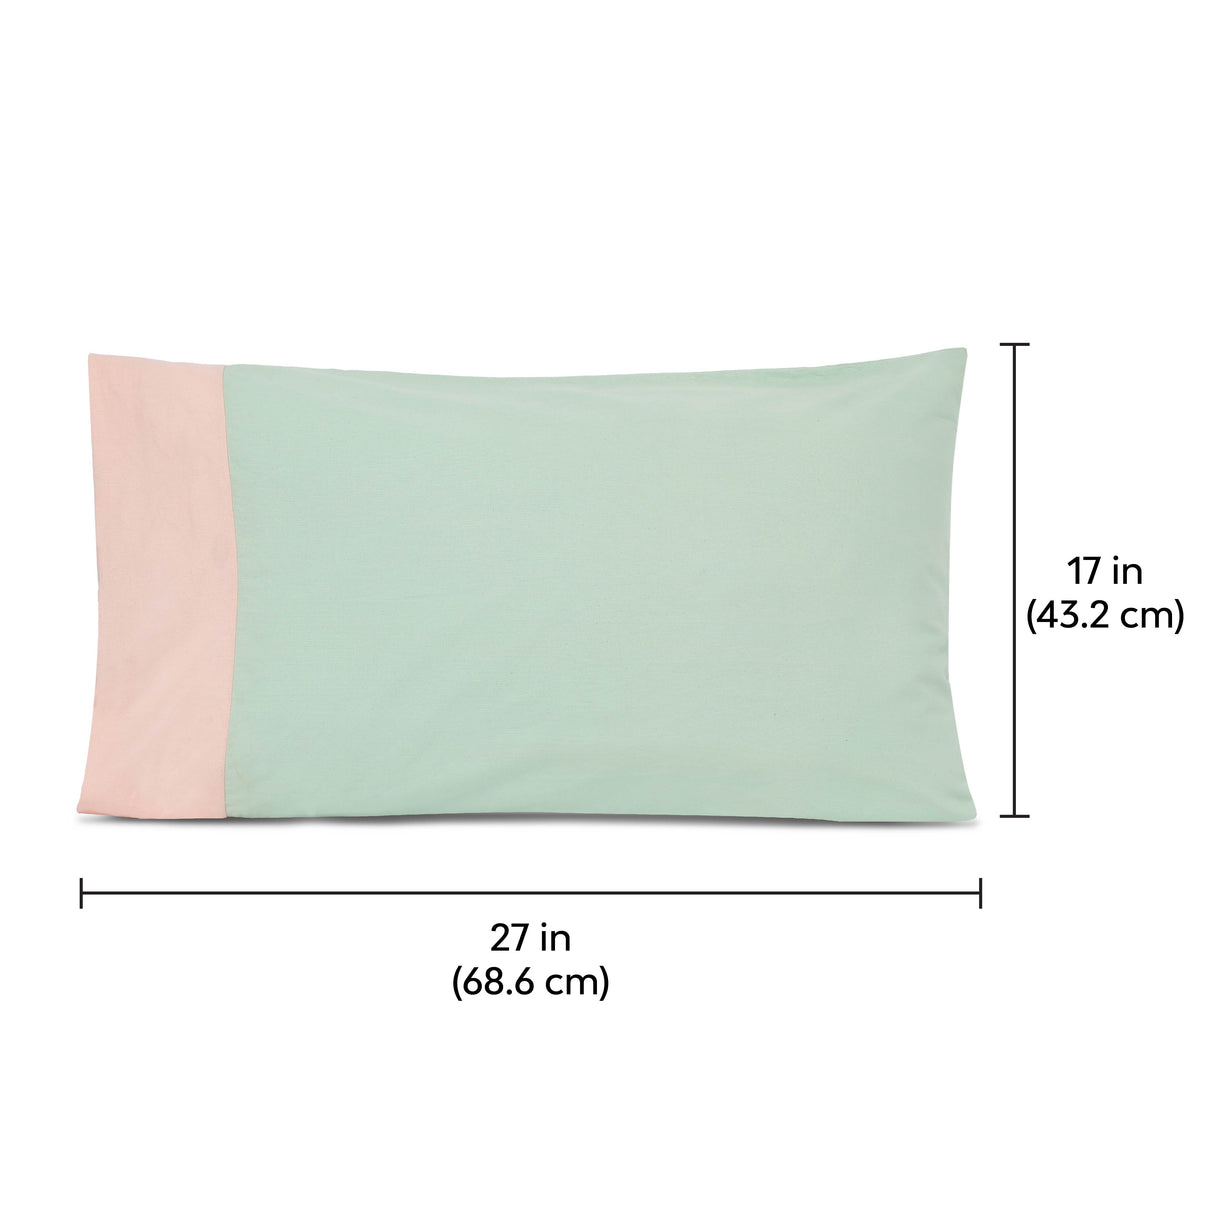 17inch pillow cover